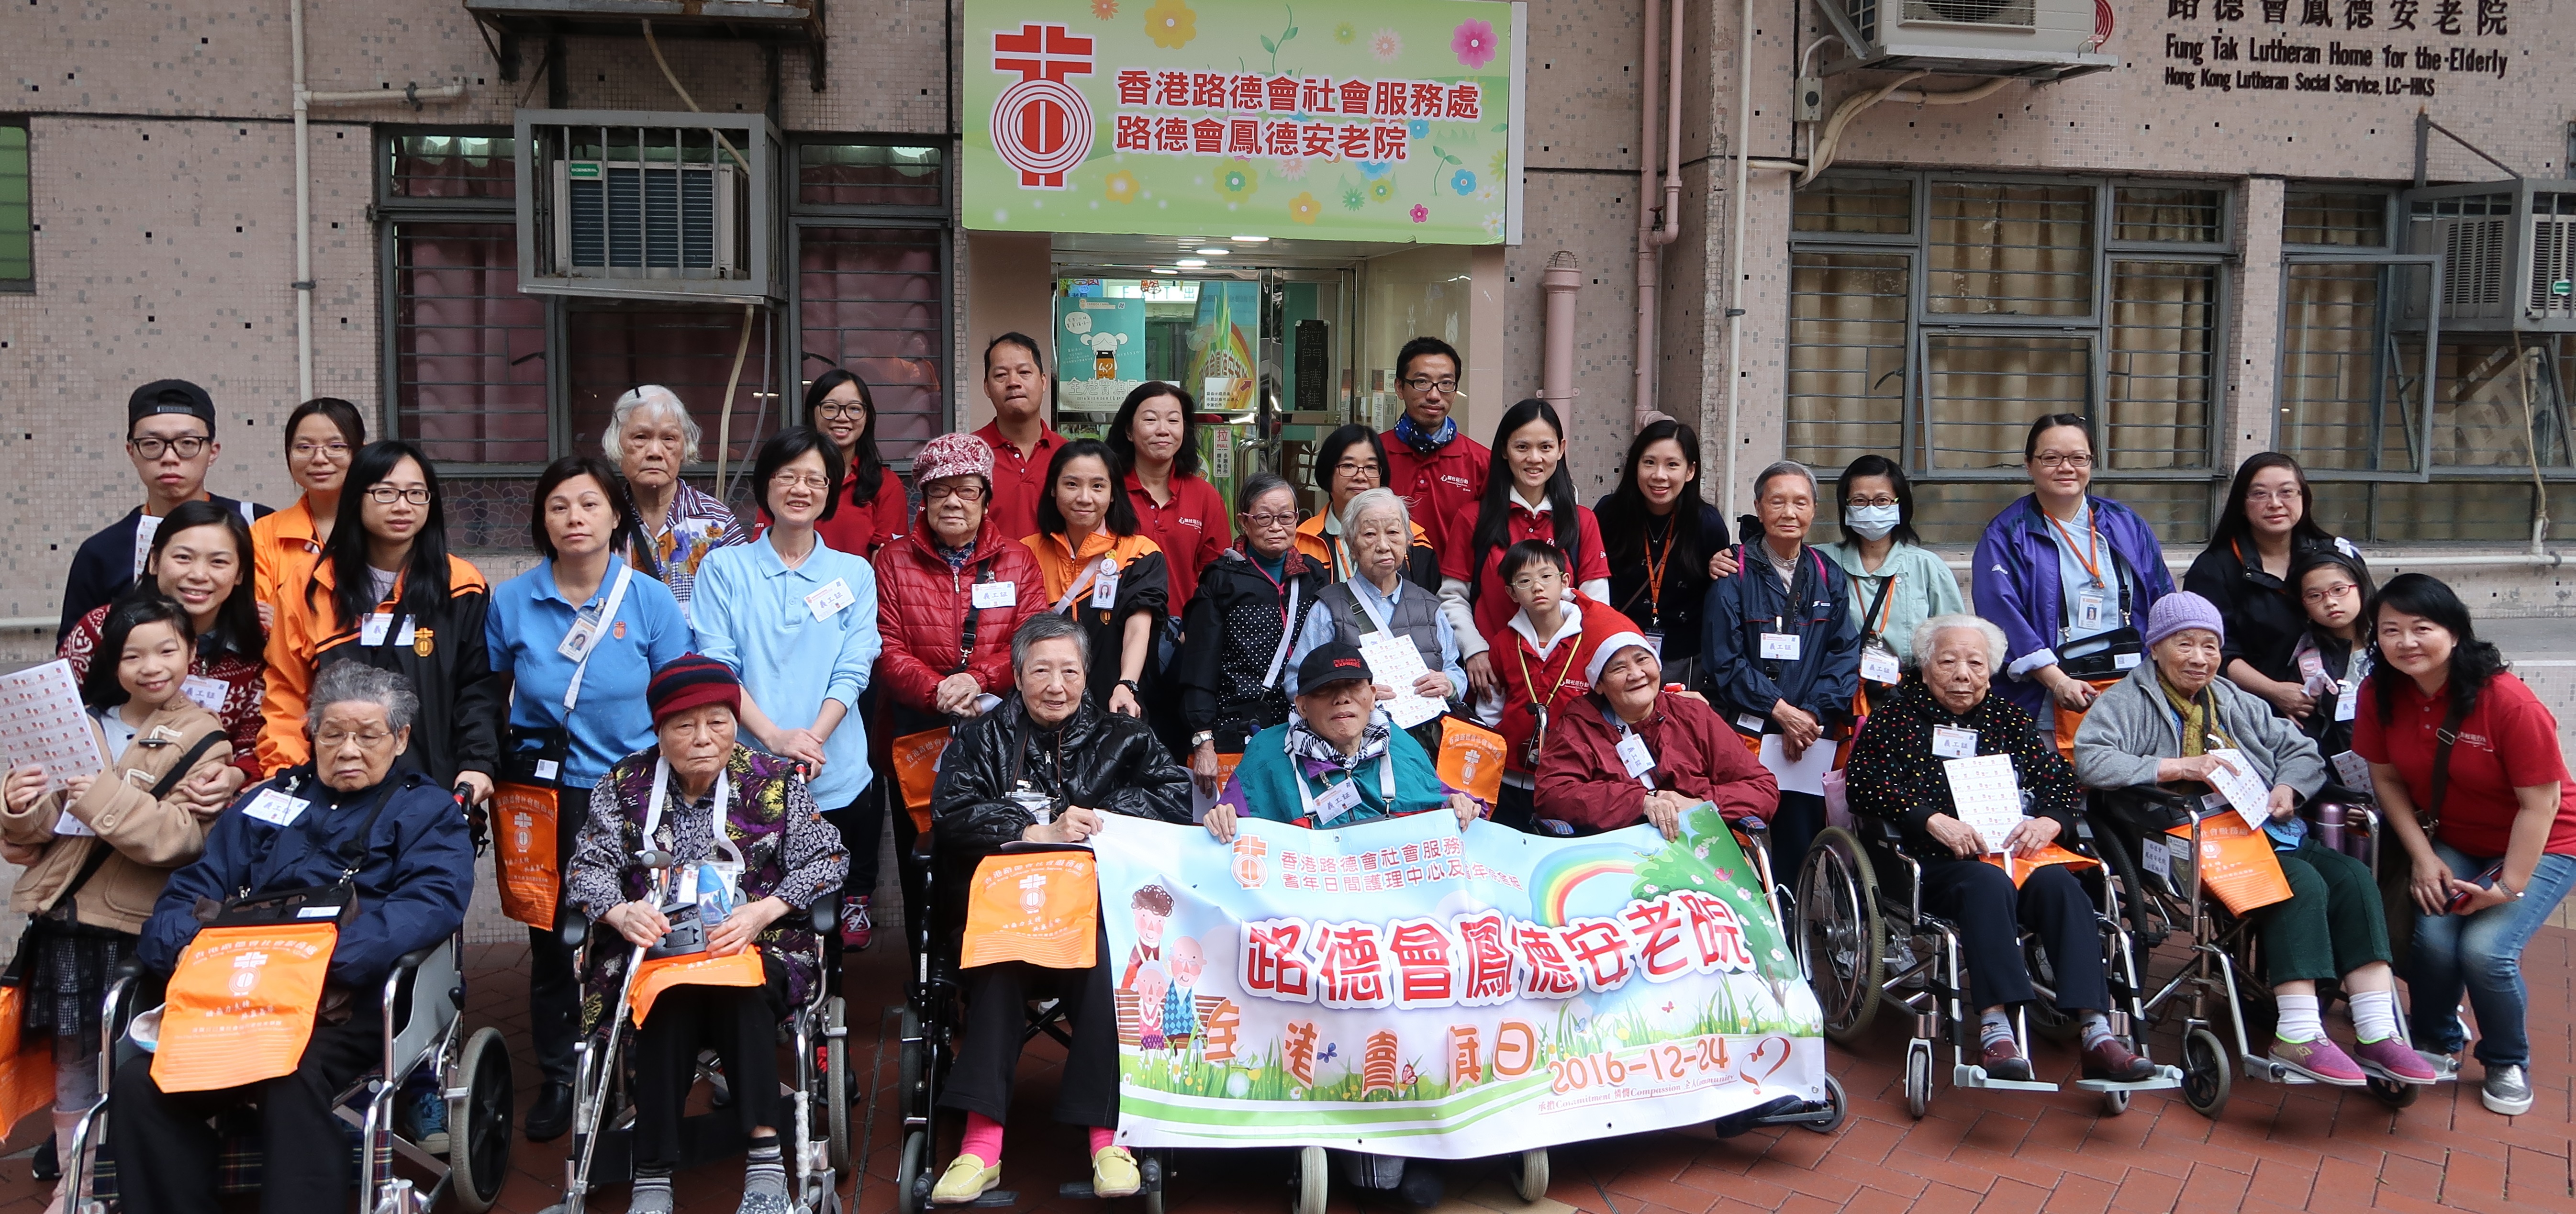 Home members took part in HKLSS Flag Day together with MTR volunteers